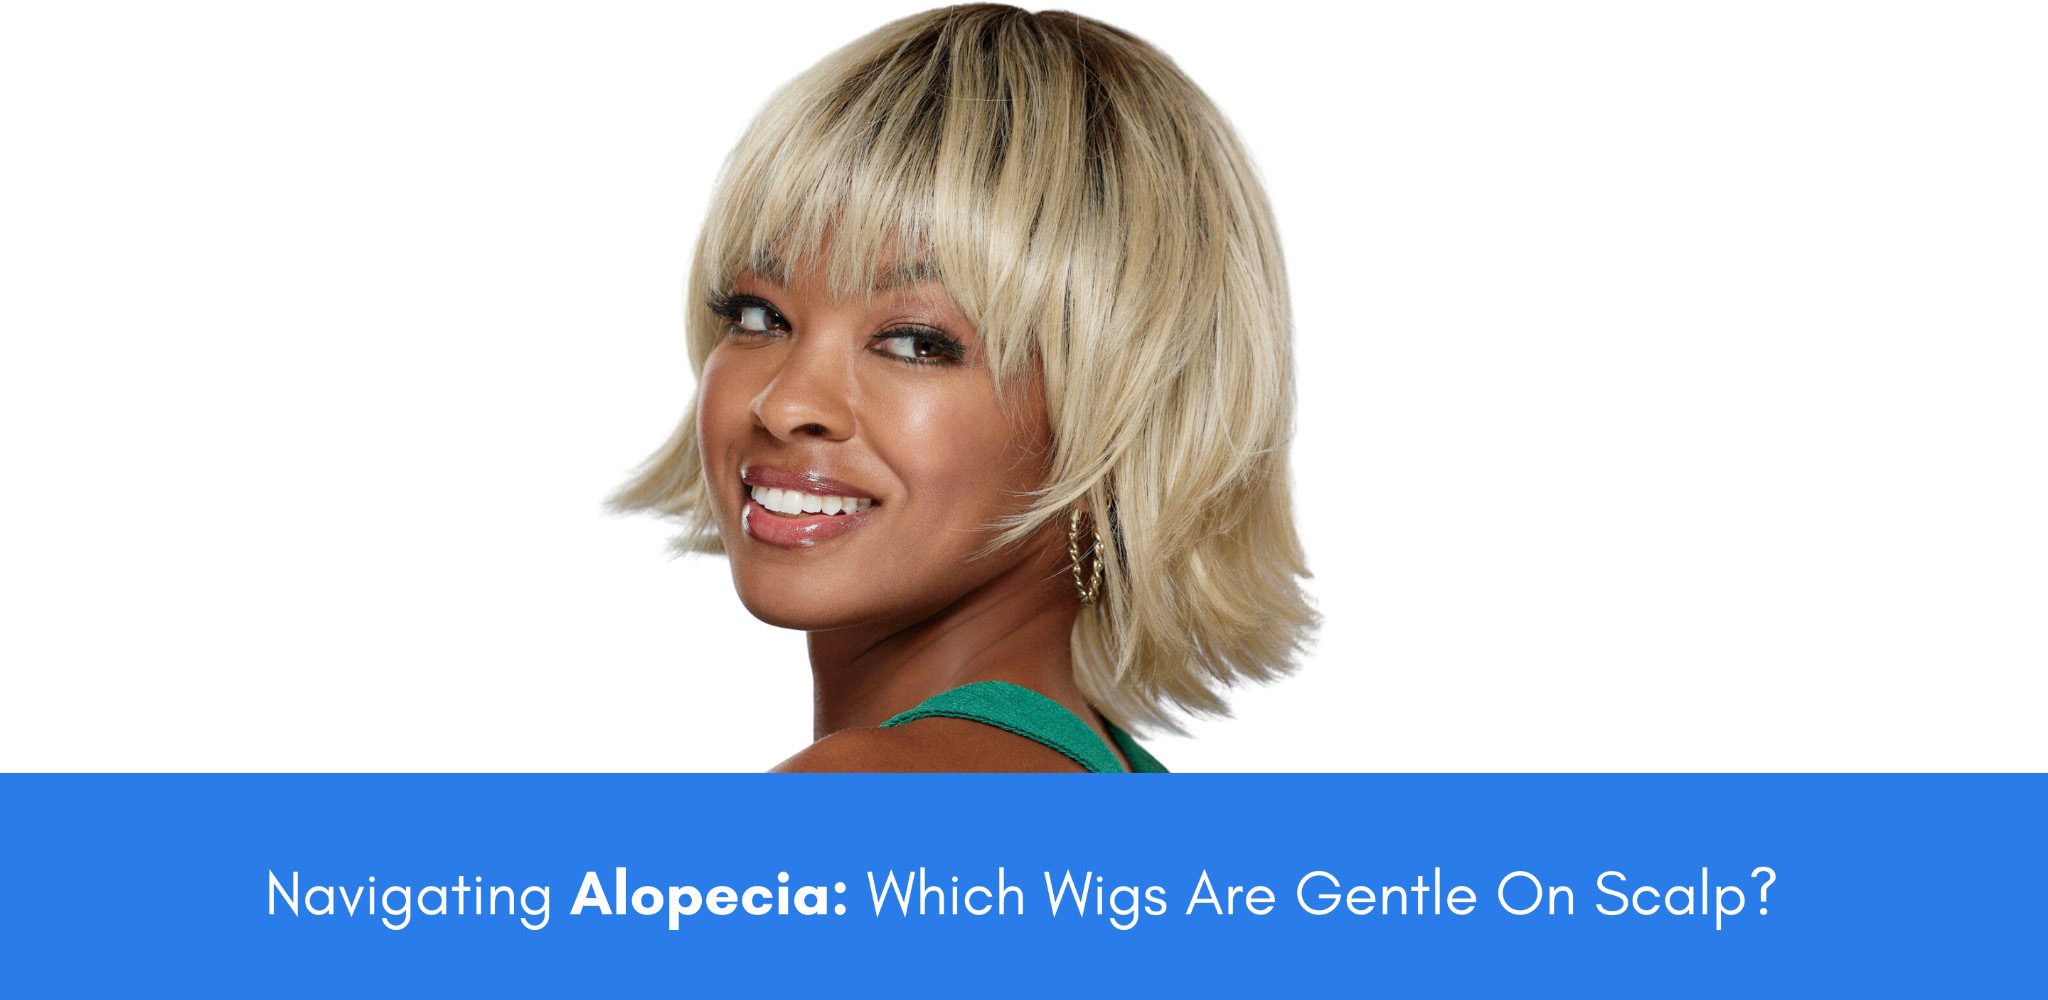 Navigating Alopecia: Which Wigs Are Gentle On Scalp?